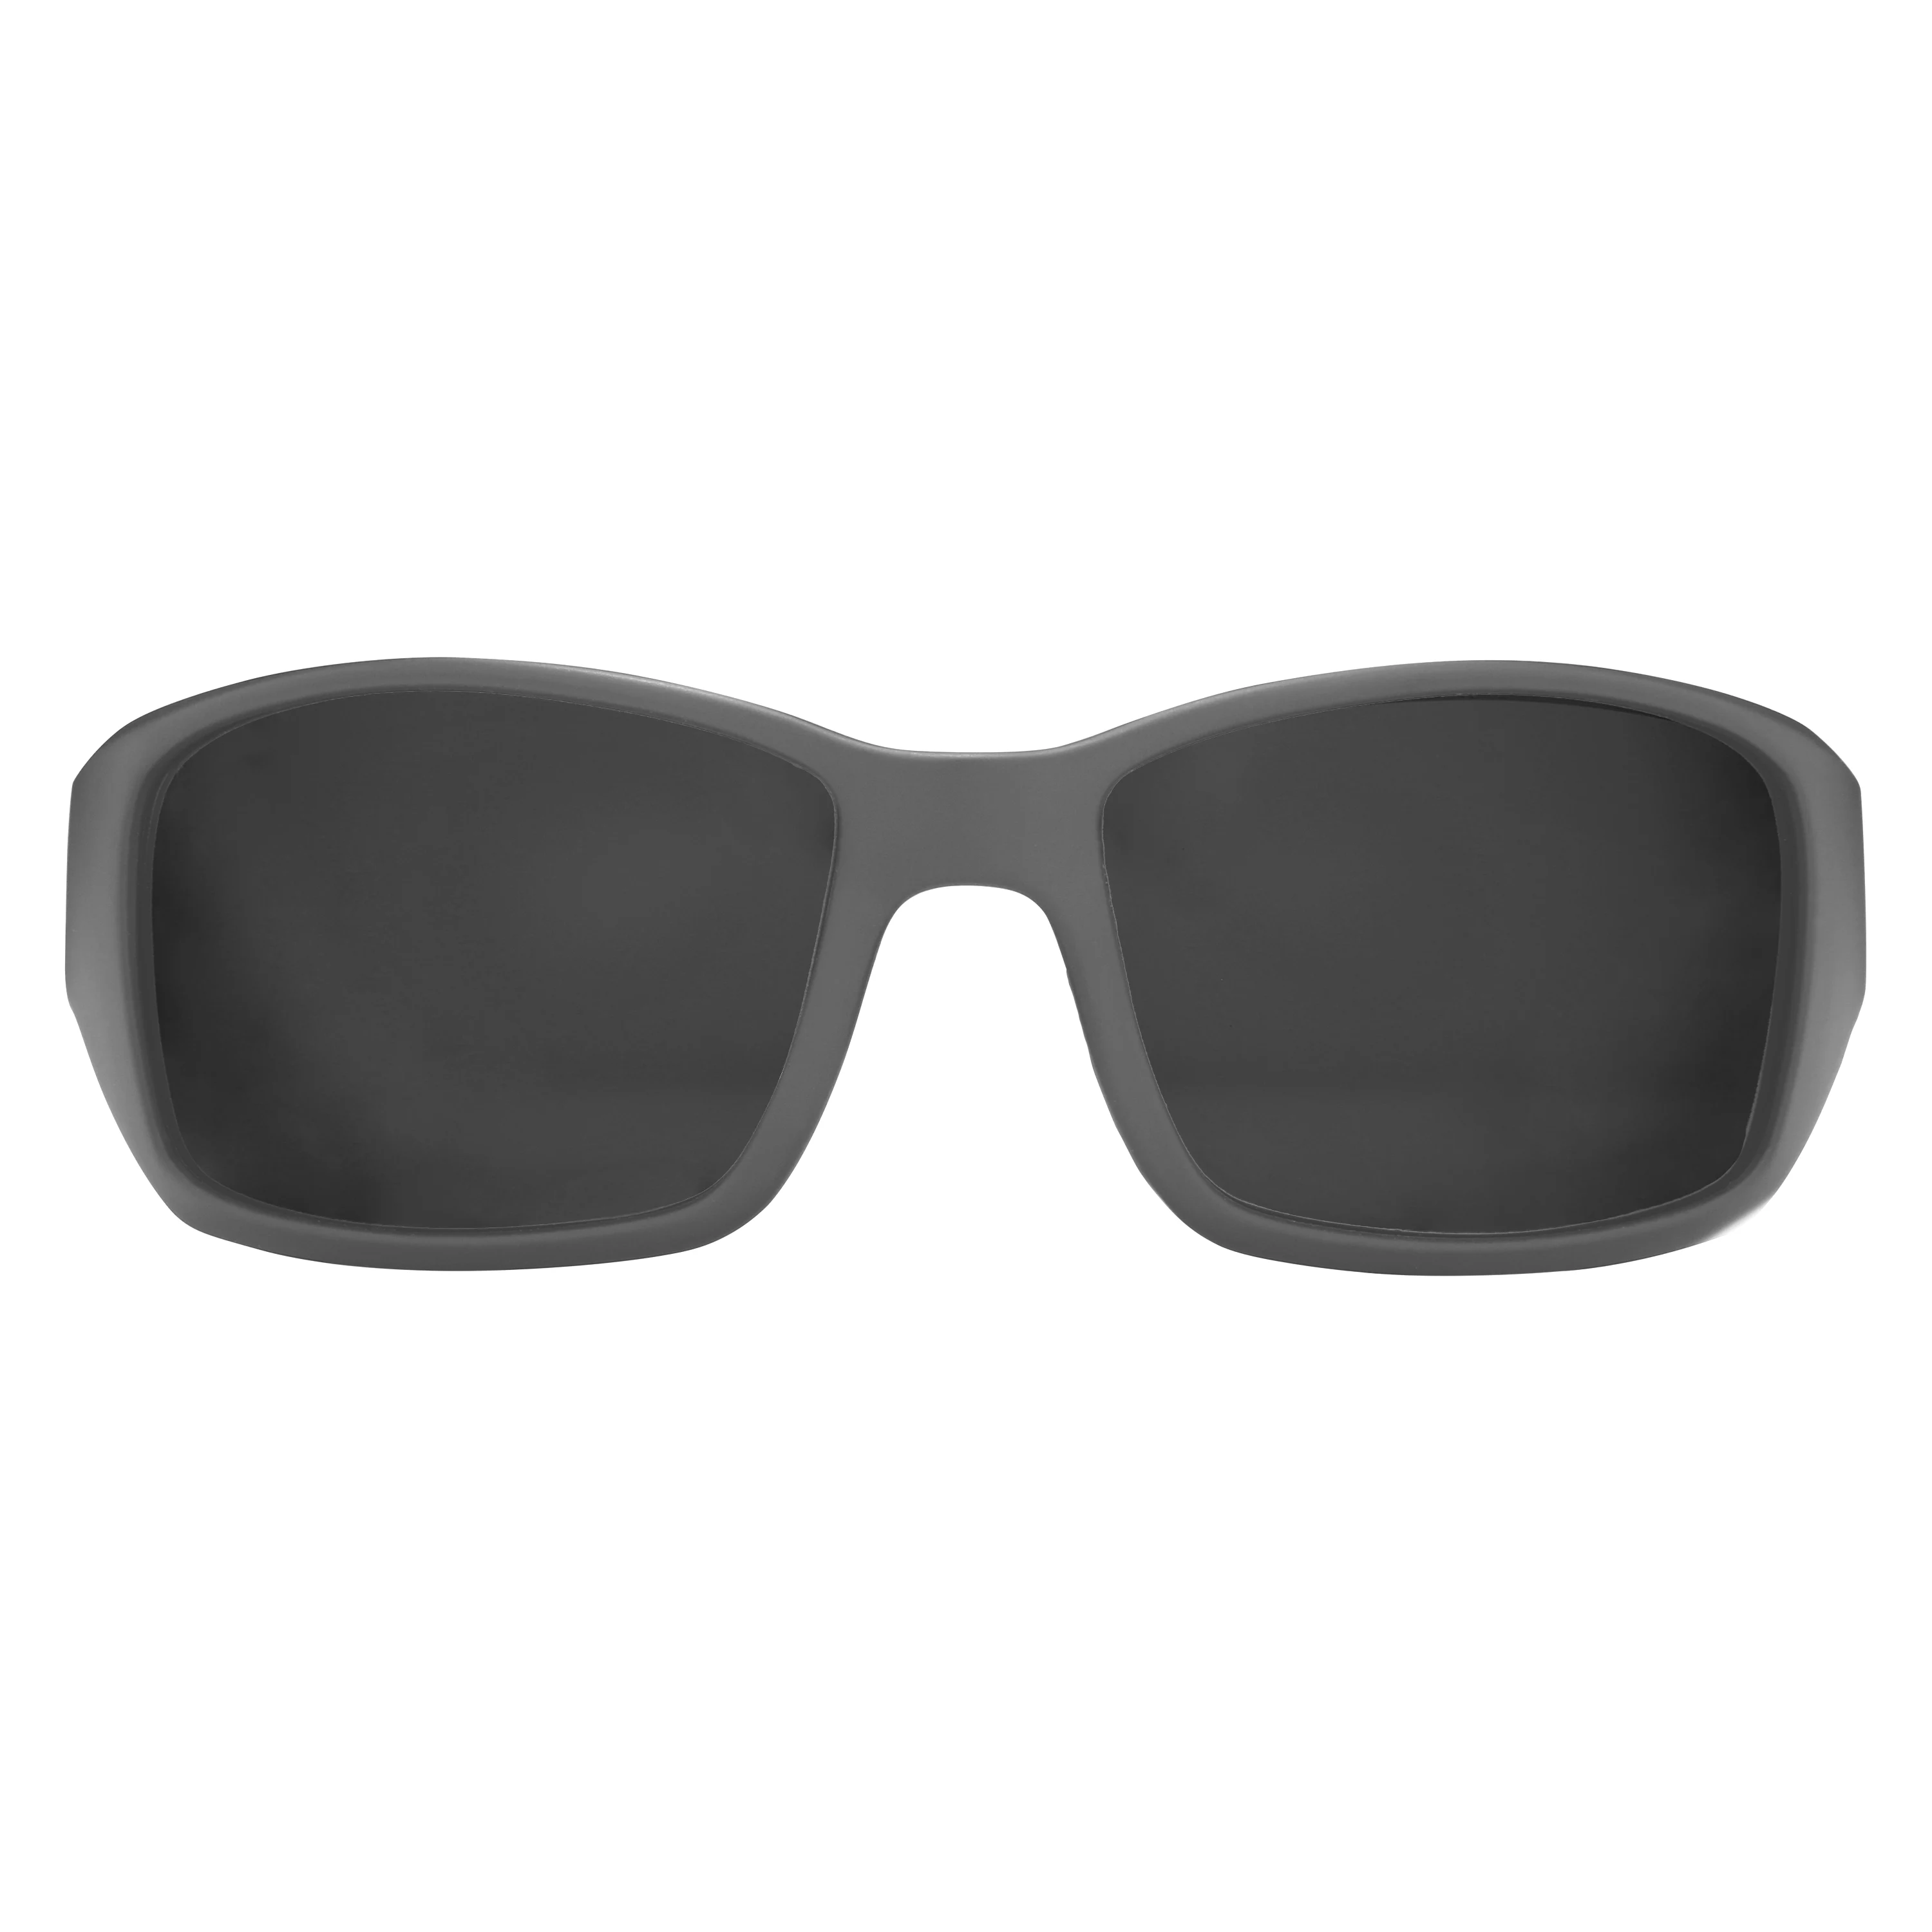 MAKO this frame is a work horse provides maximum sun protection with thermoforce lenses Matte Gray No Mirror